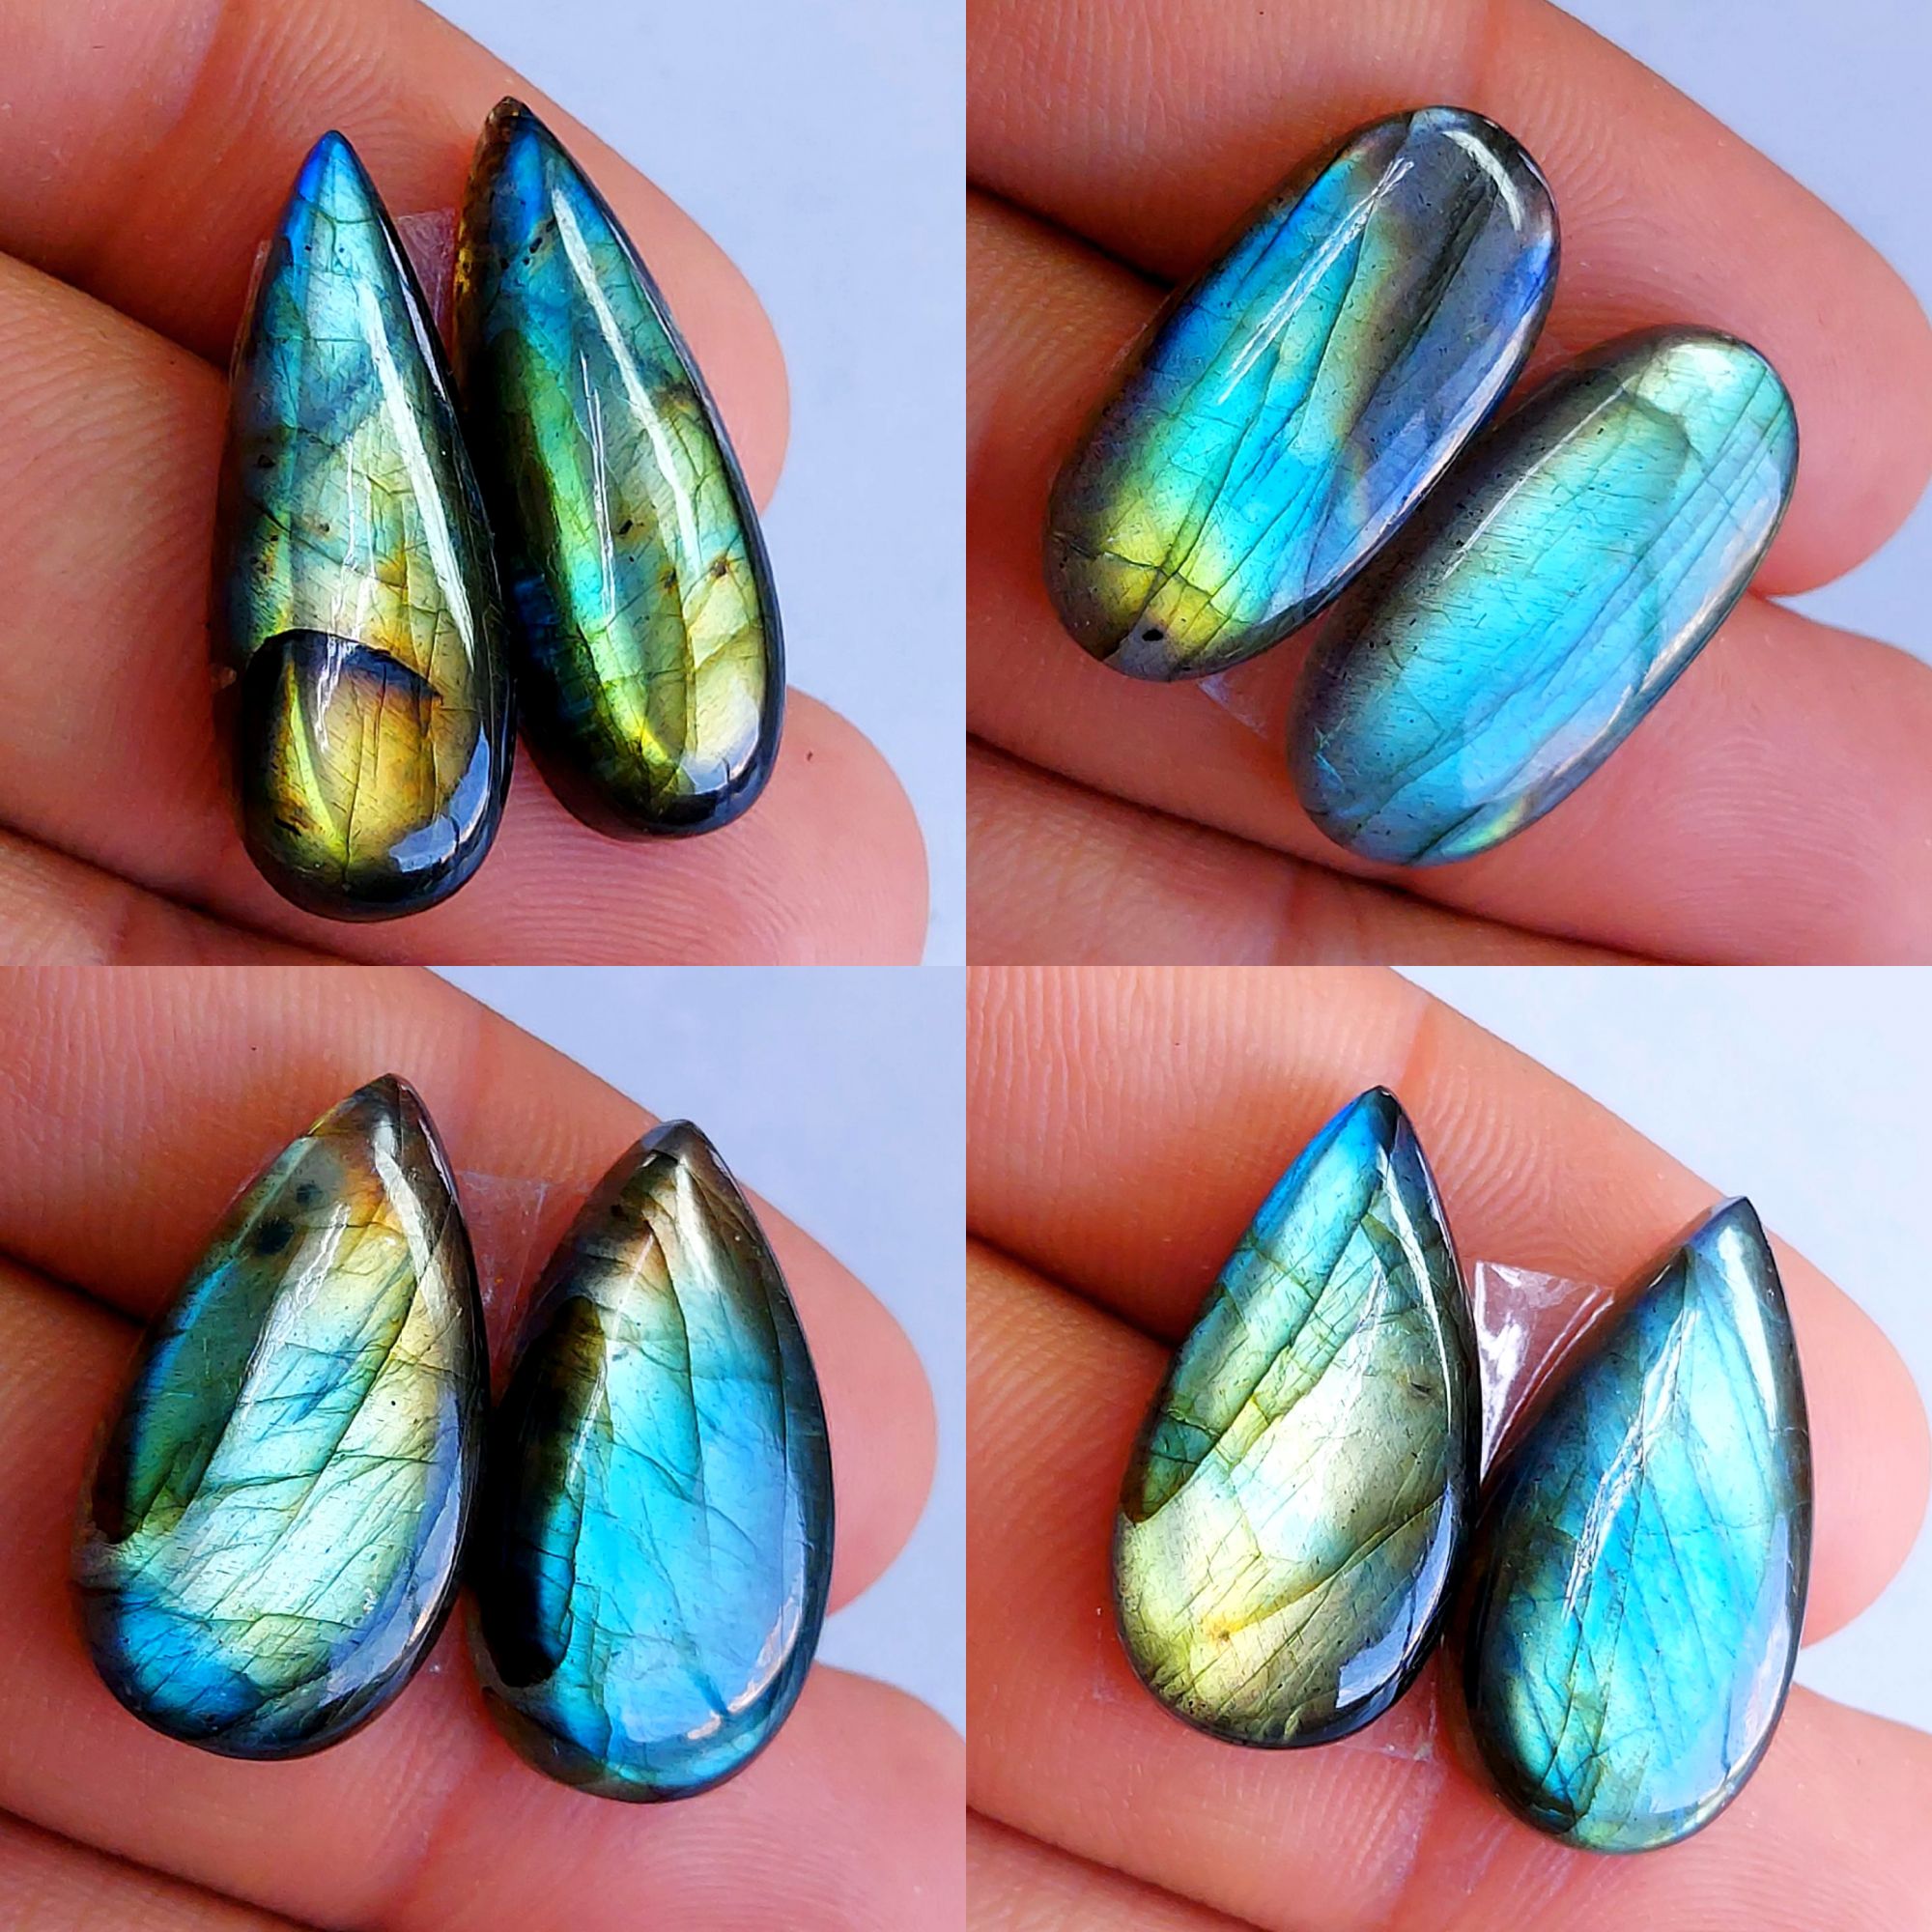 4 Pairs lot 111Cts Natural Labradorite cabochon pair lot for jewelry making loose gemstone lot mix shape and size earring pairs 23x12 22x10mm